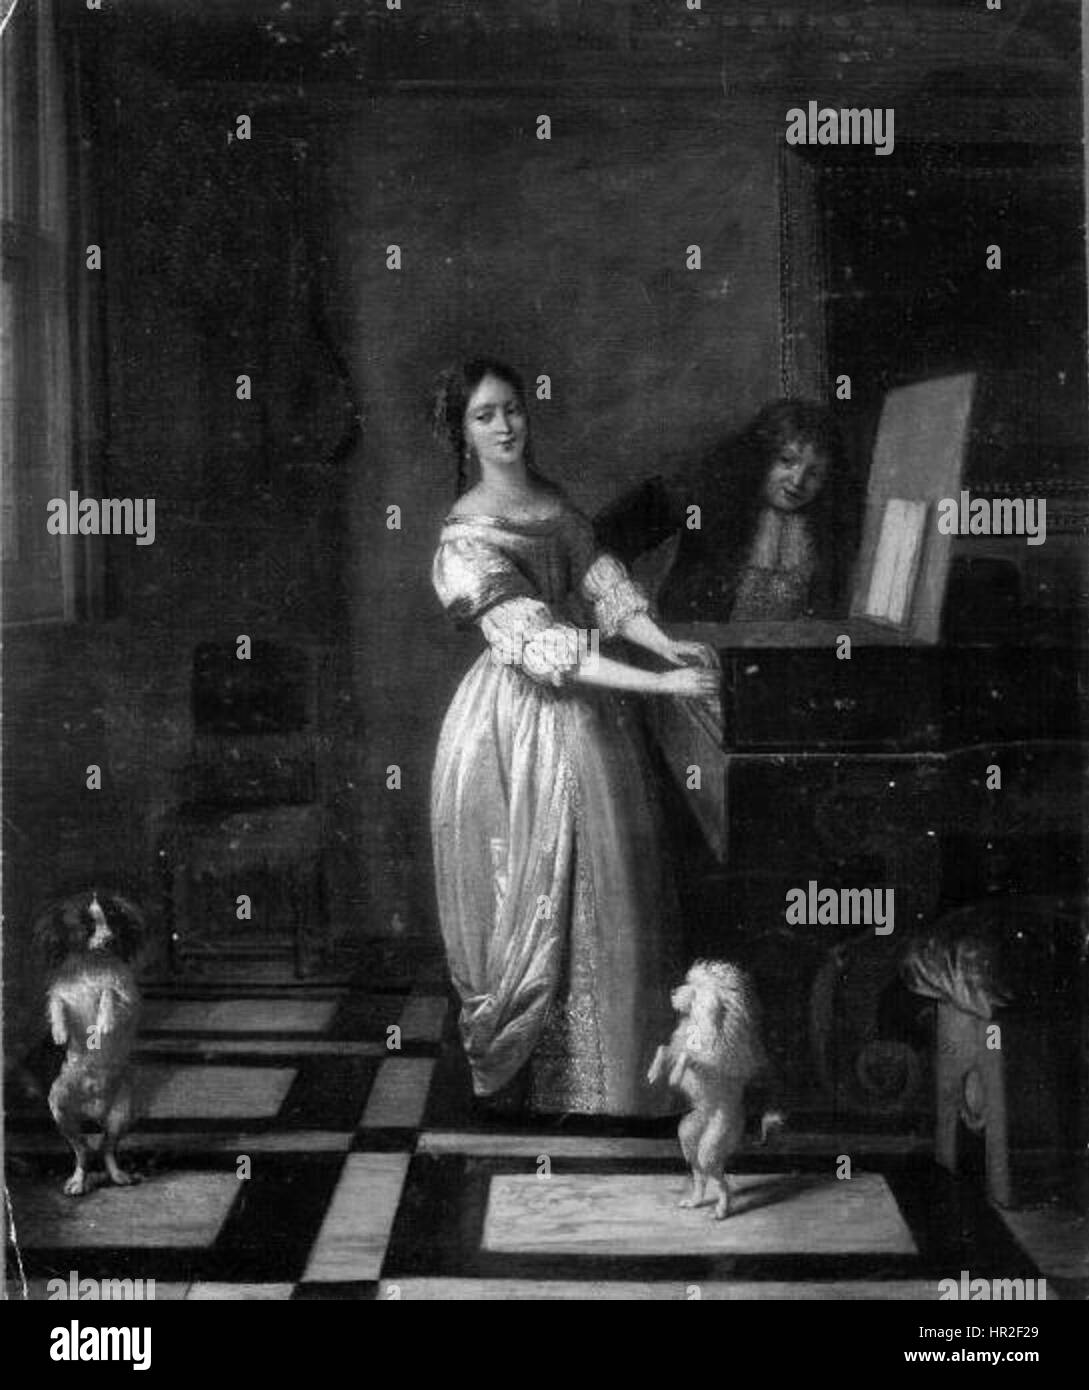 Pieter de Hooch - Woman playing the virginal with a man and two dancing dogs Stock Photo